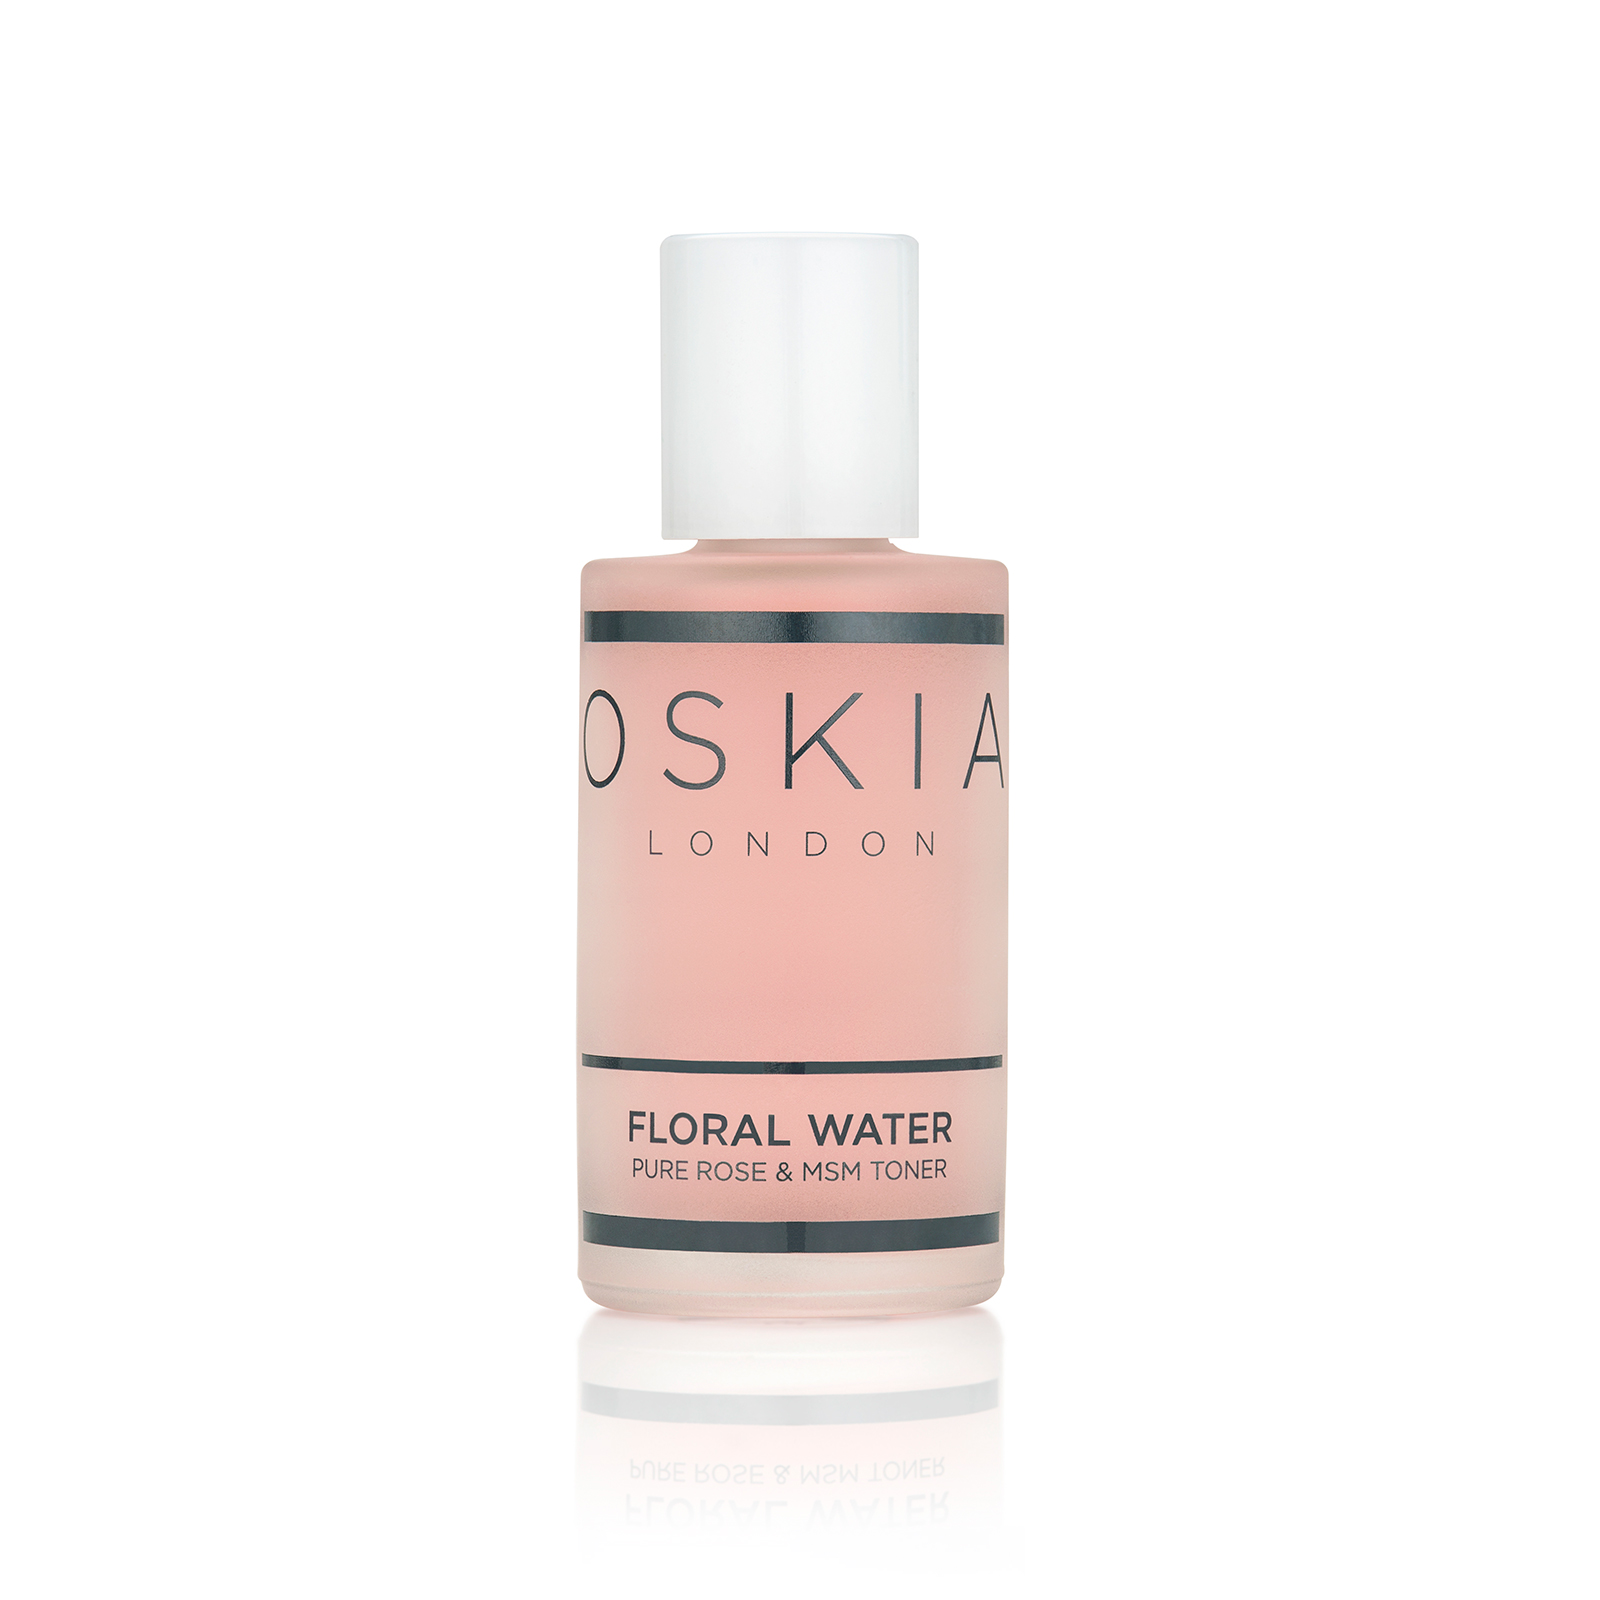 Oskia Floral Water Pure Rose & MSM Toner 30 ml.